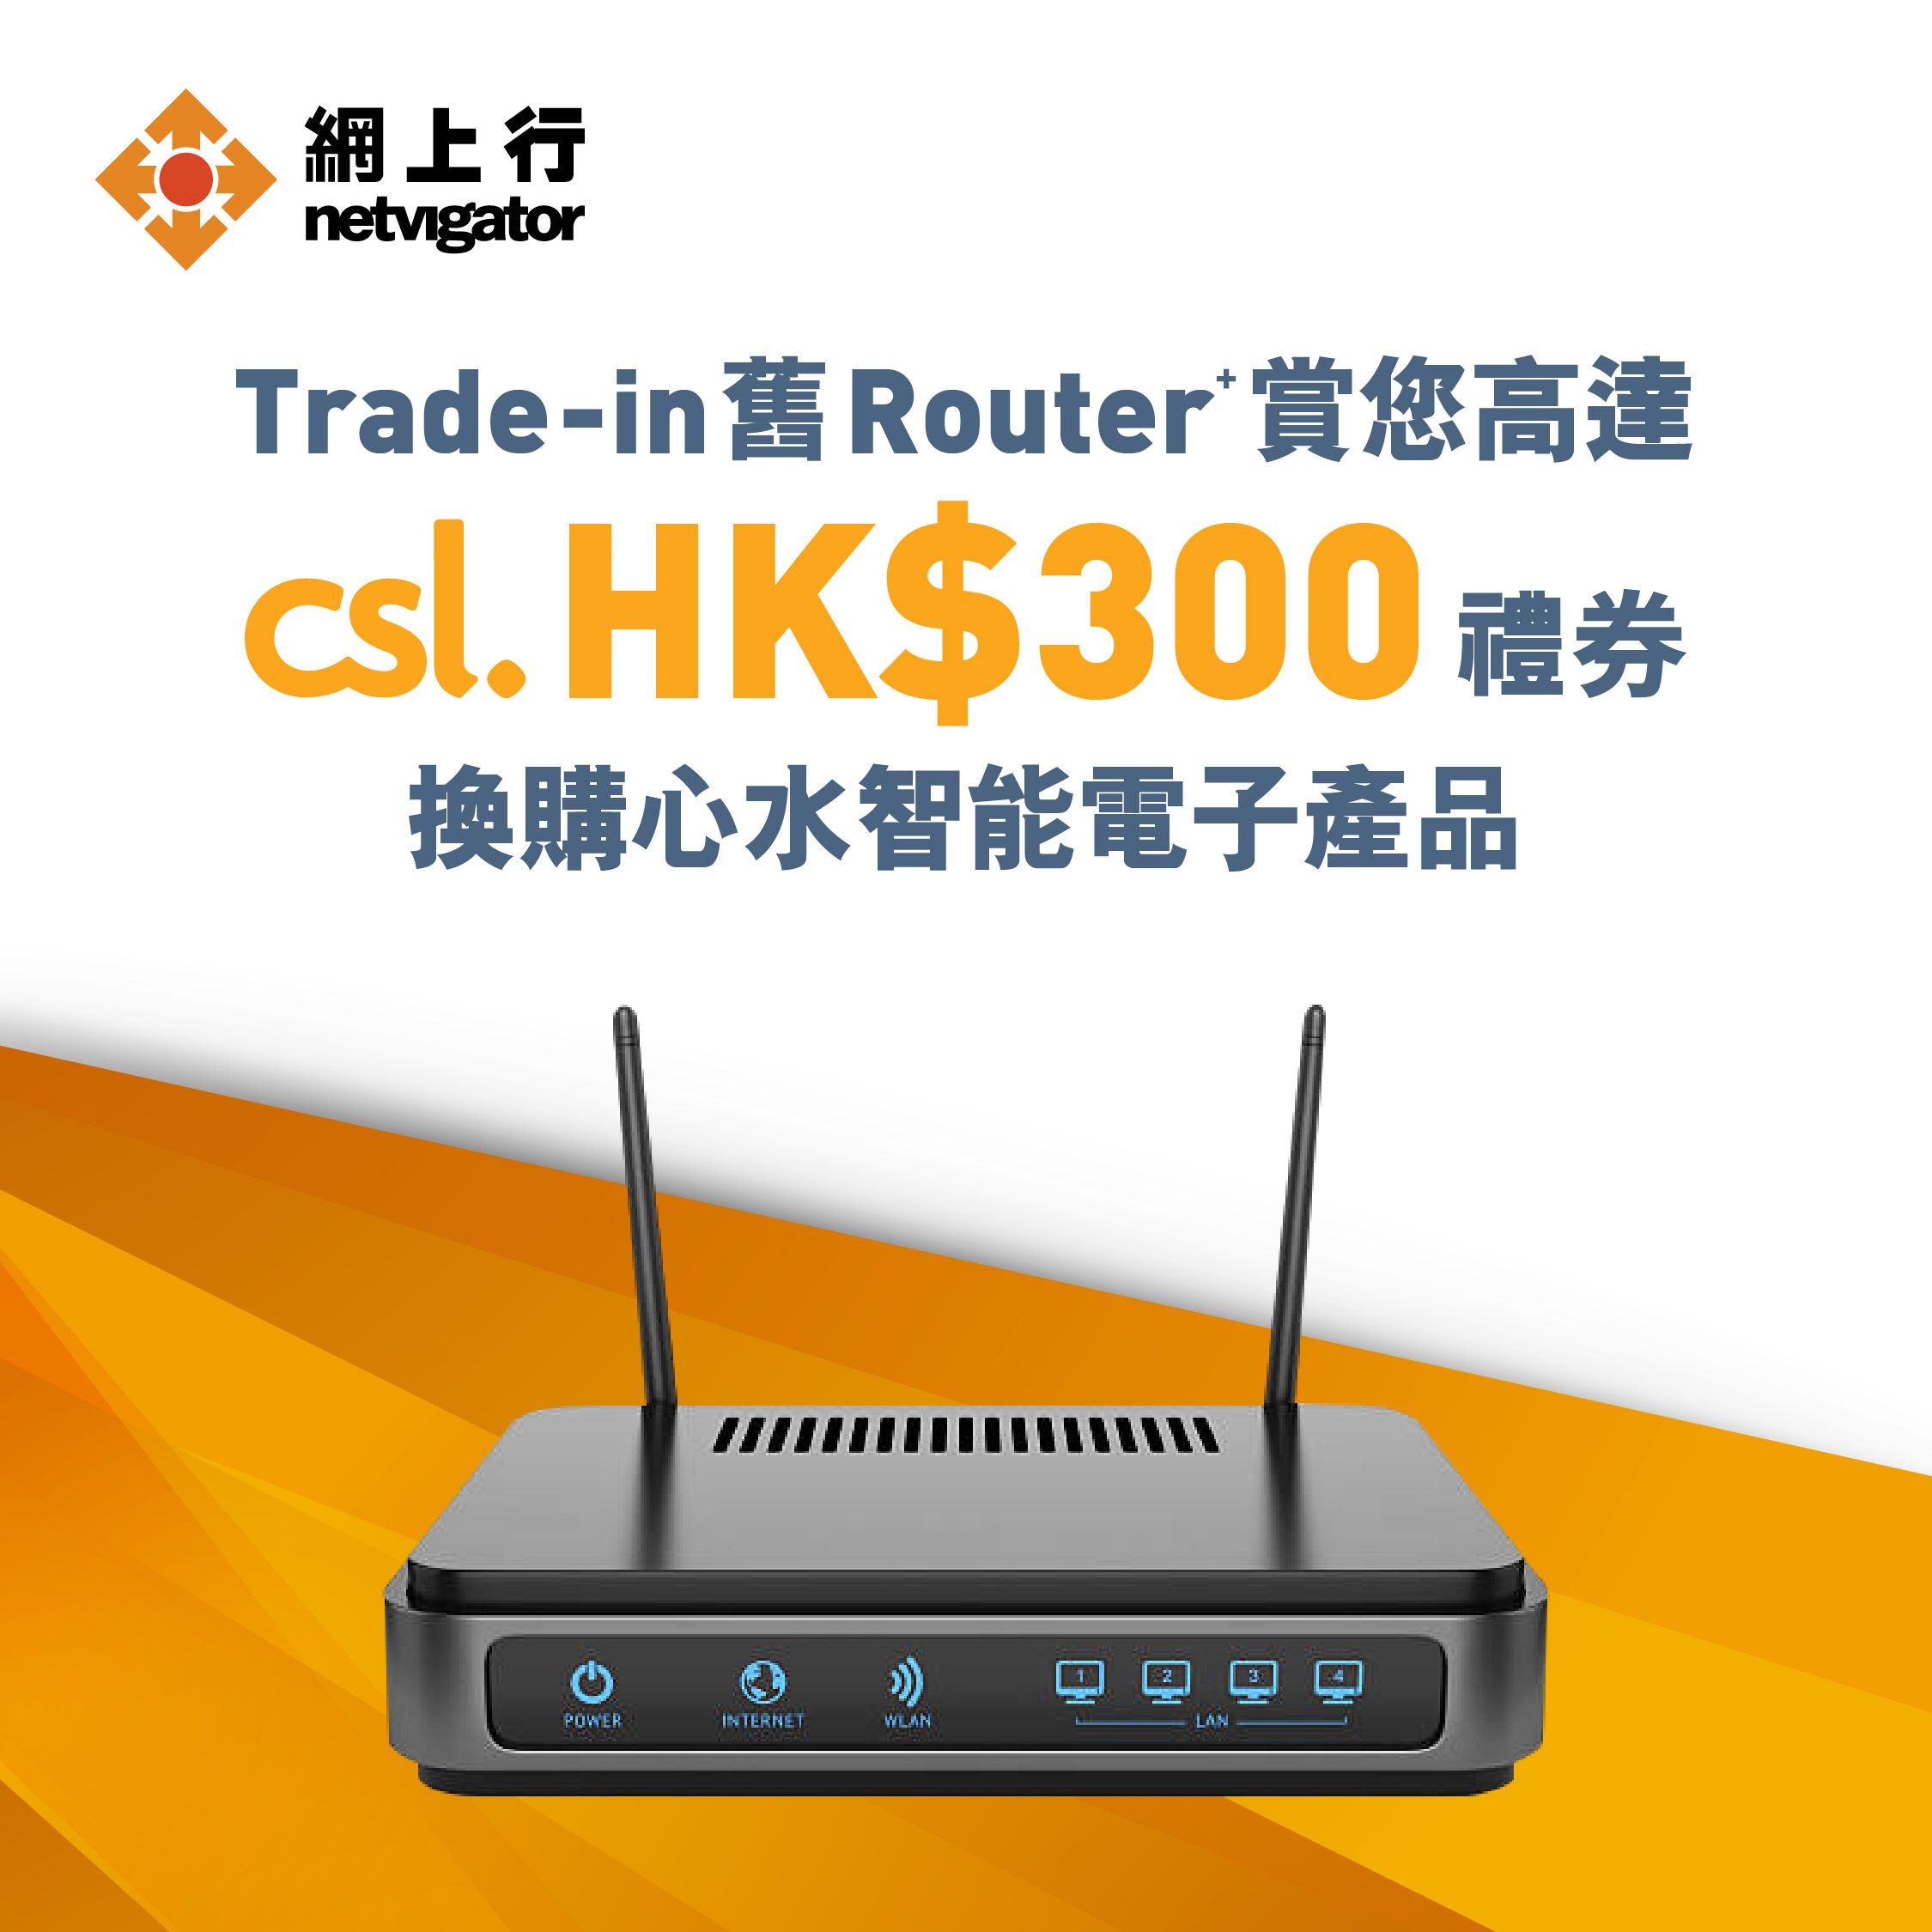 router-trade-in-program